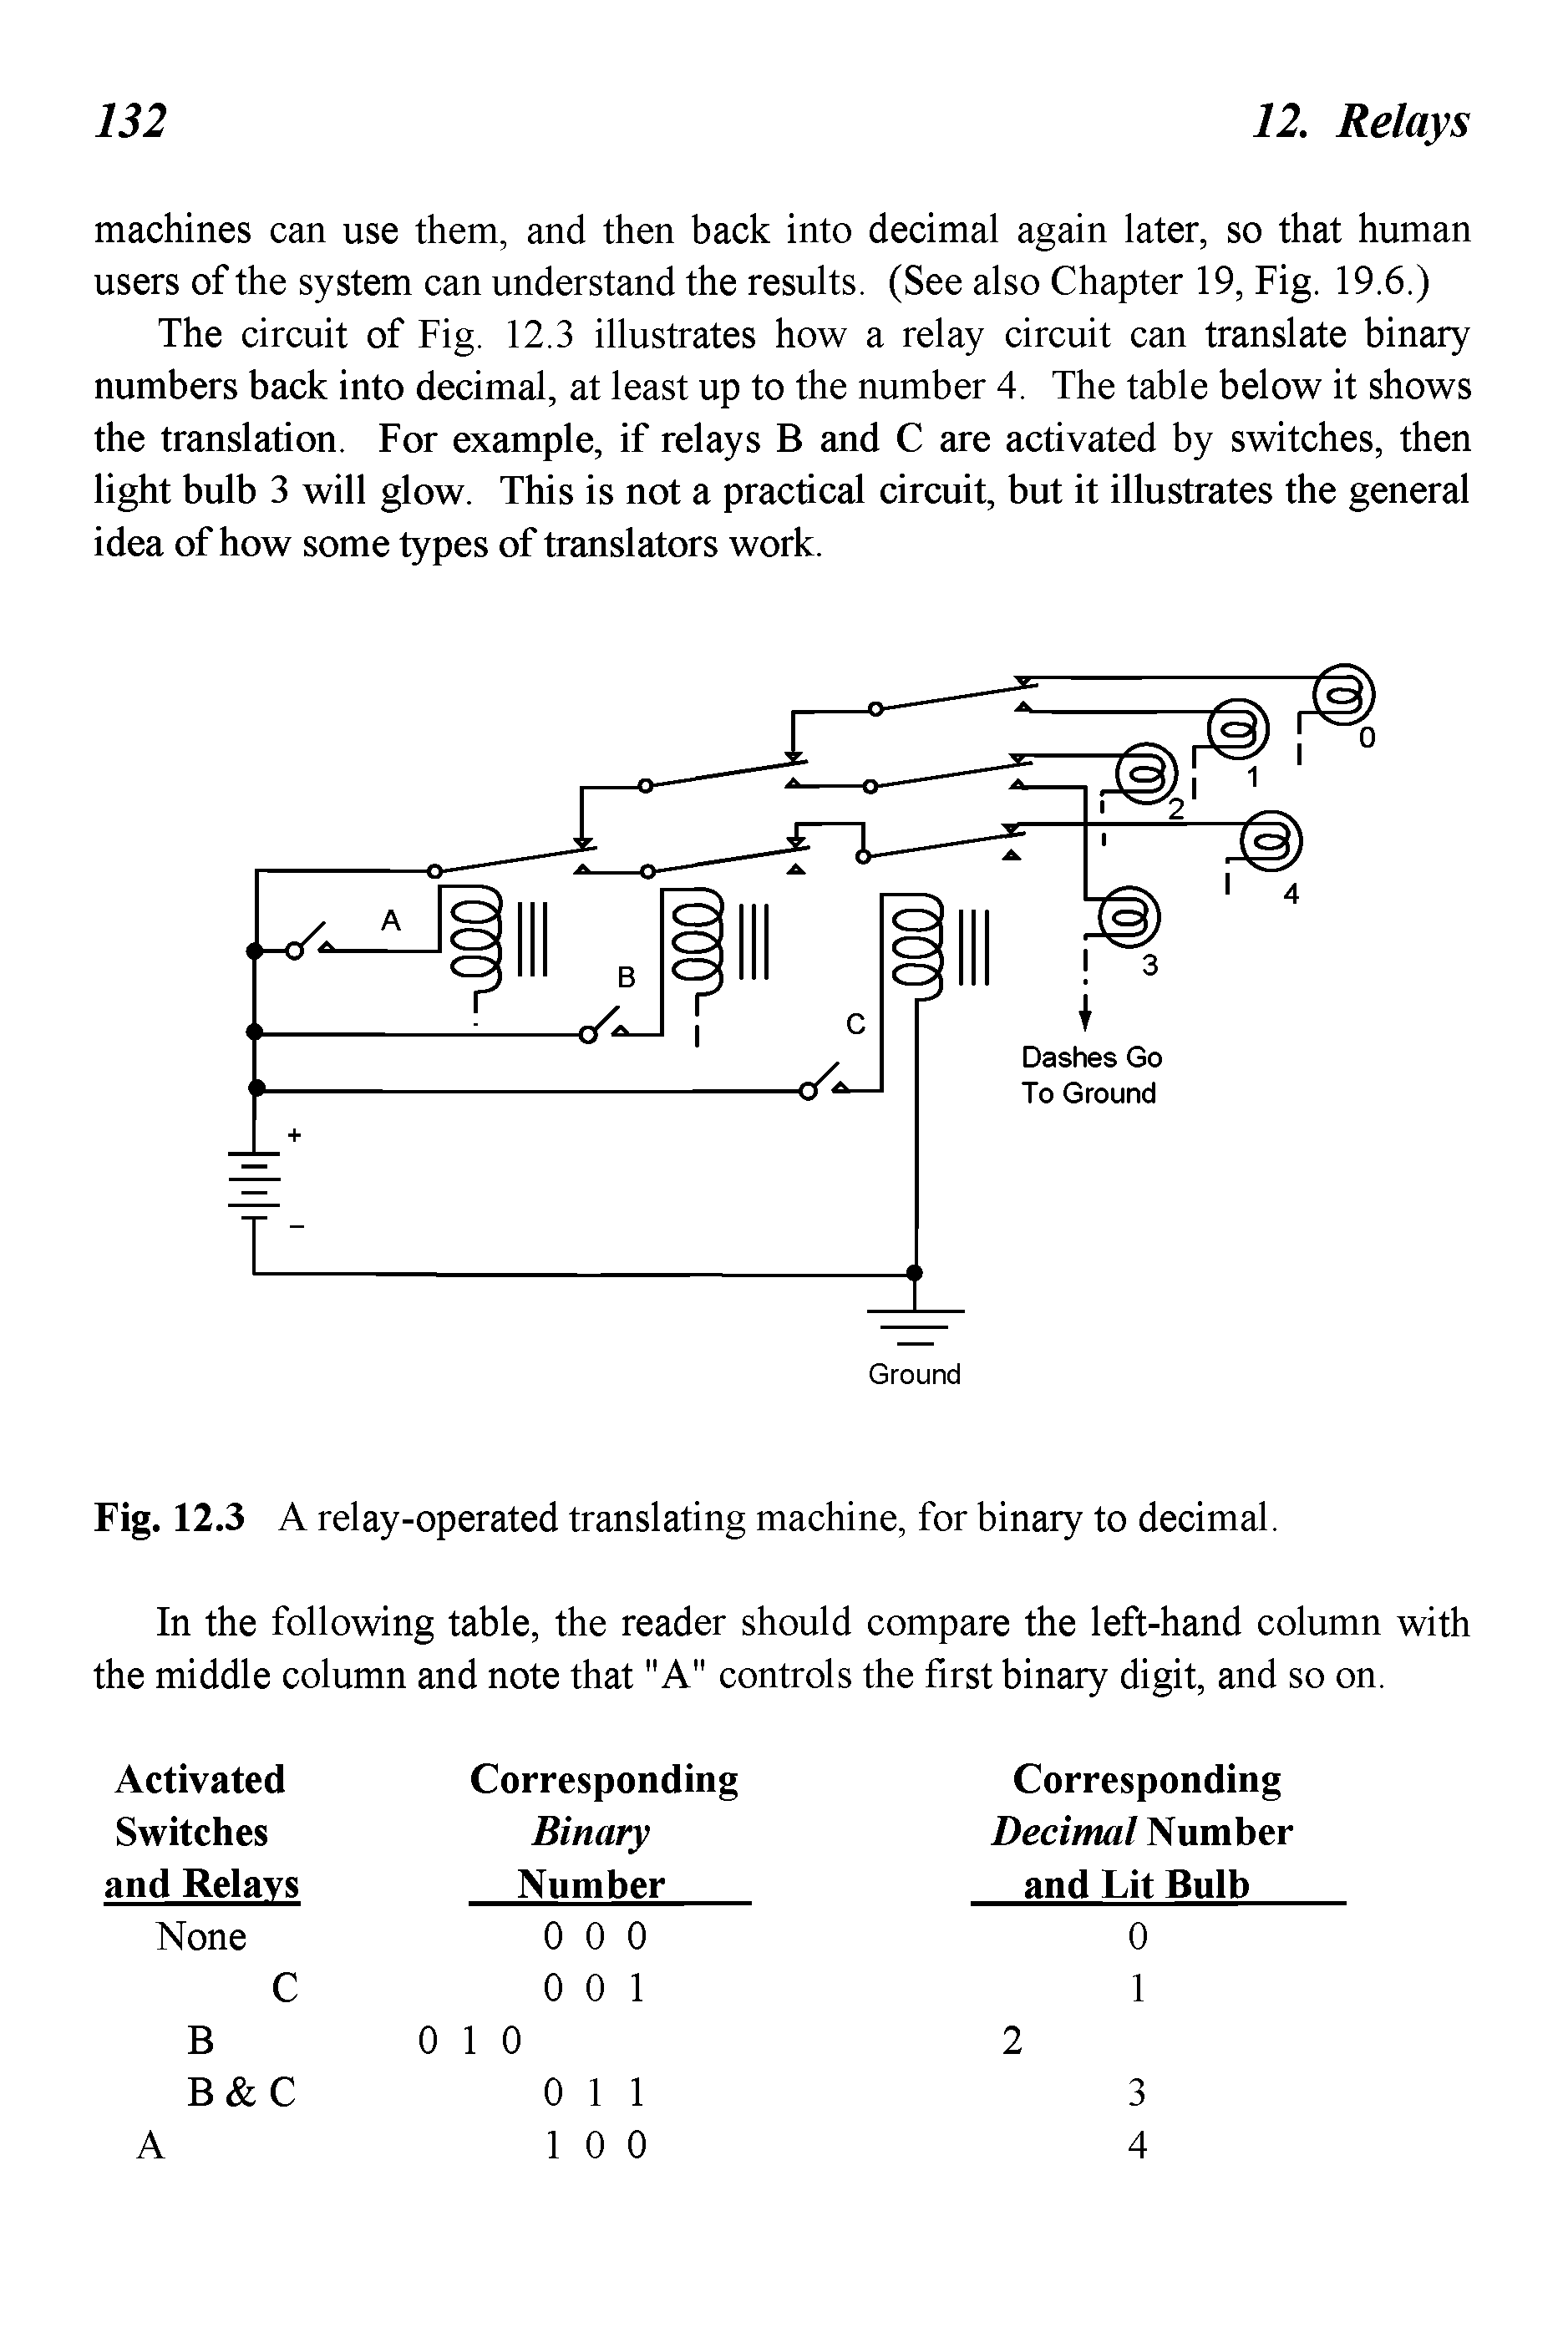 Fig. 12.3 A relay-operated translating machine, for binary to decimal.